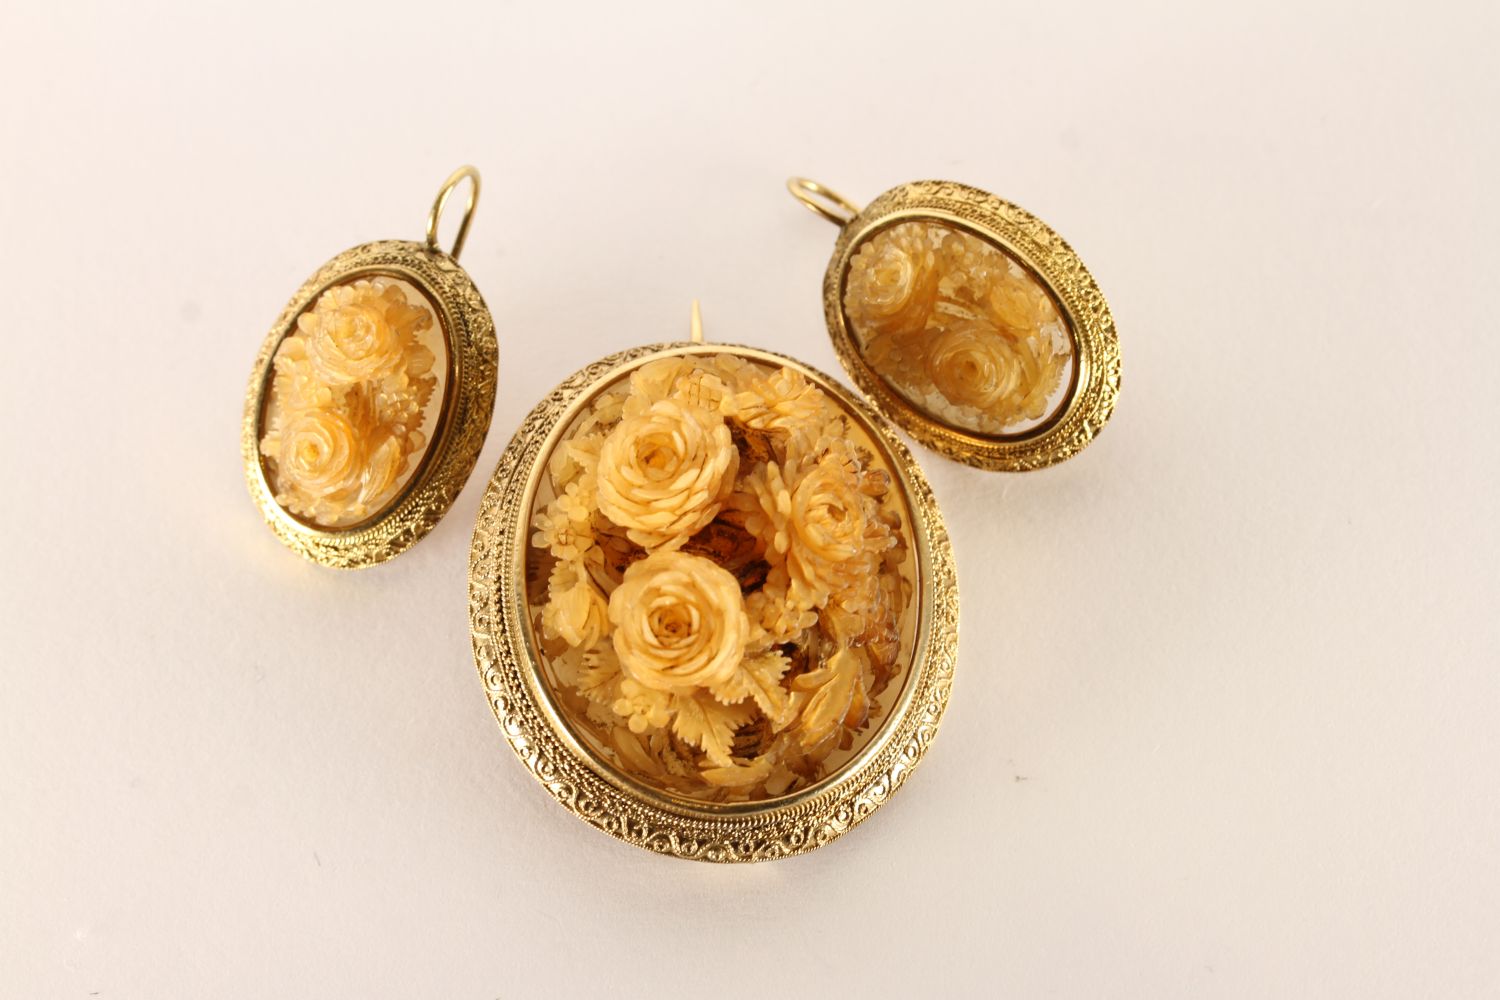 18ct carved floral brooch and earring set, carved cameo of floral design, detailed scroll work to